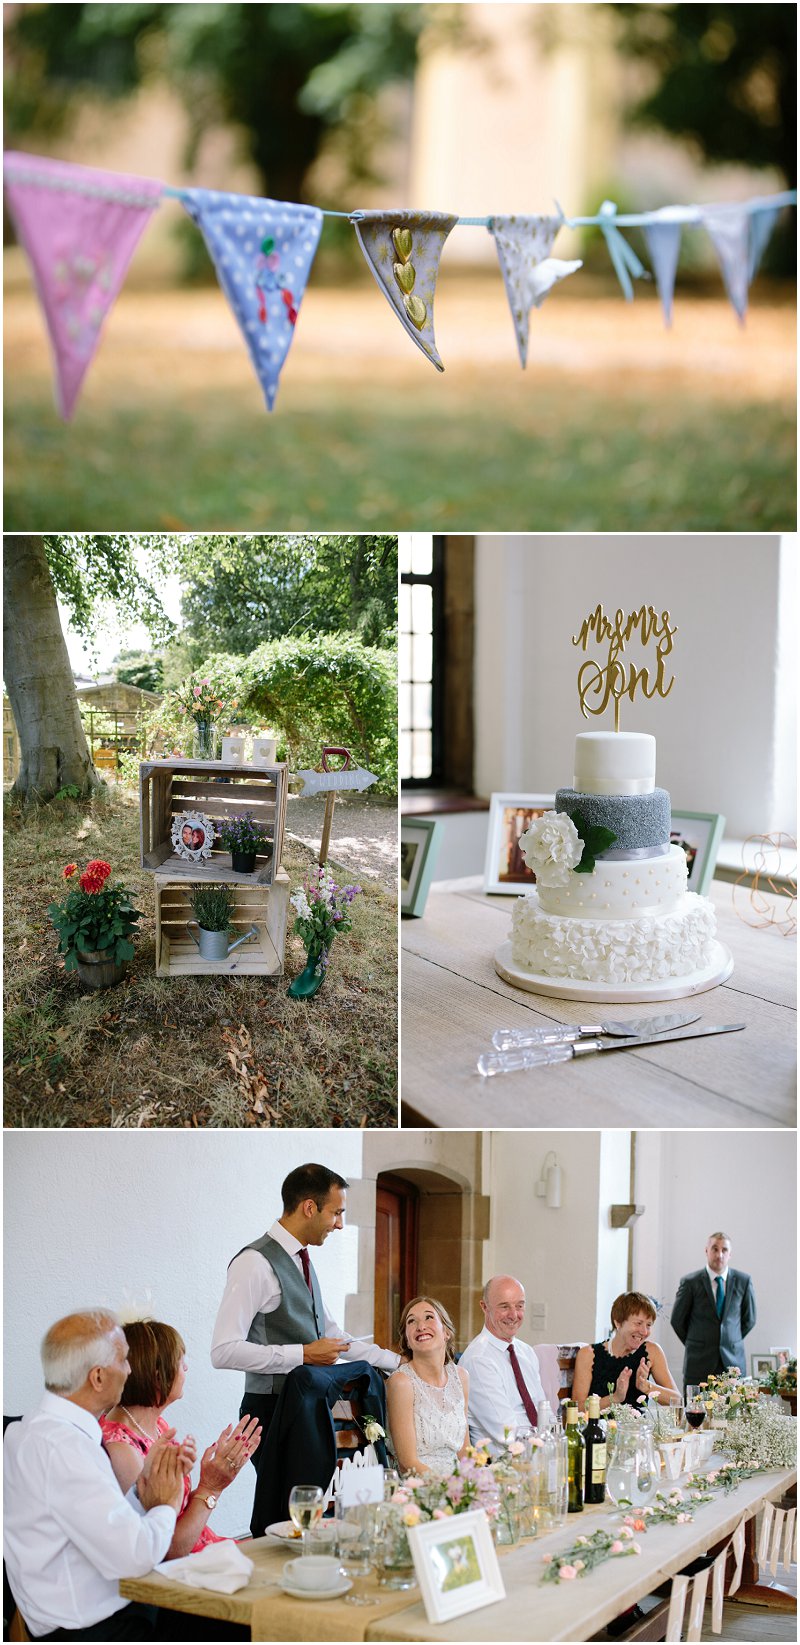 Wedding details and speeches at rustic wedding